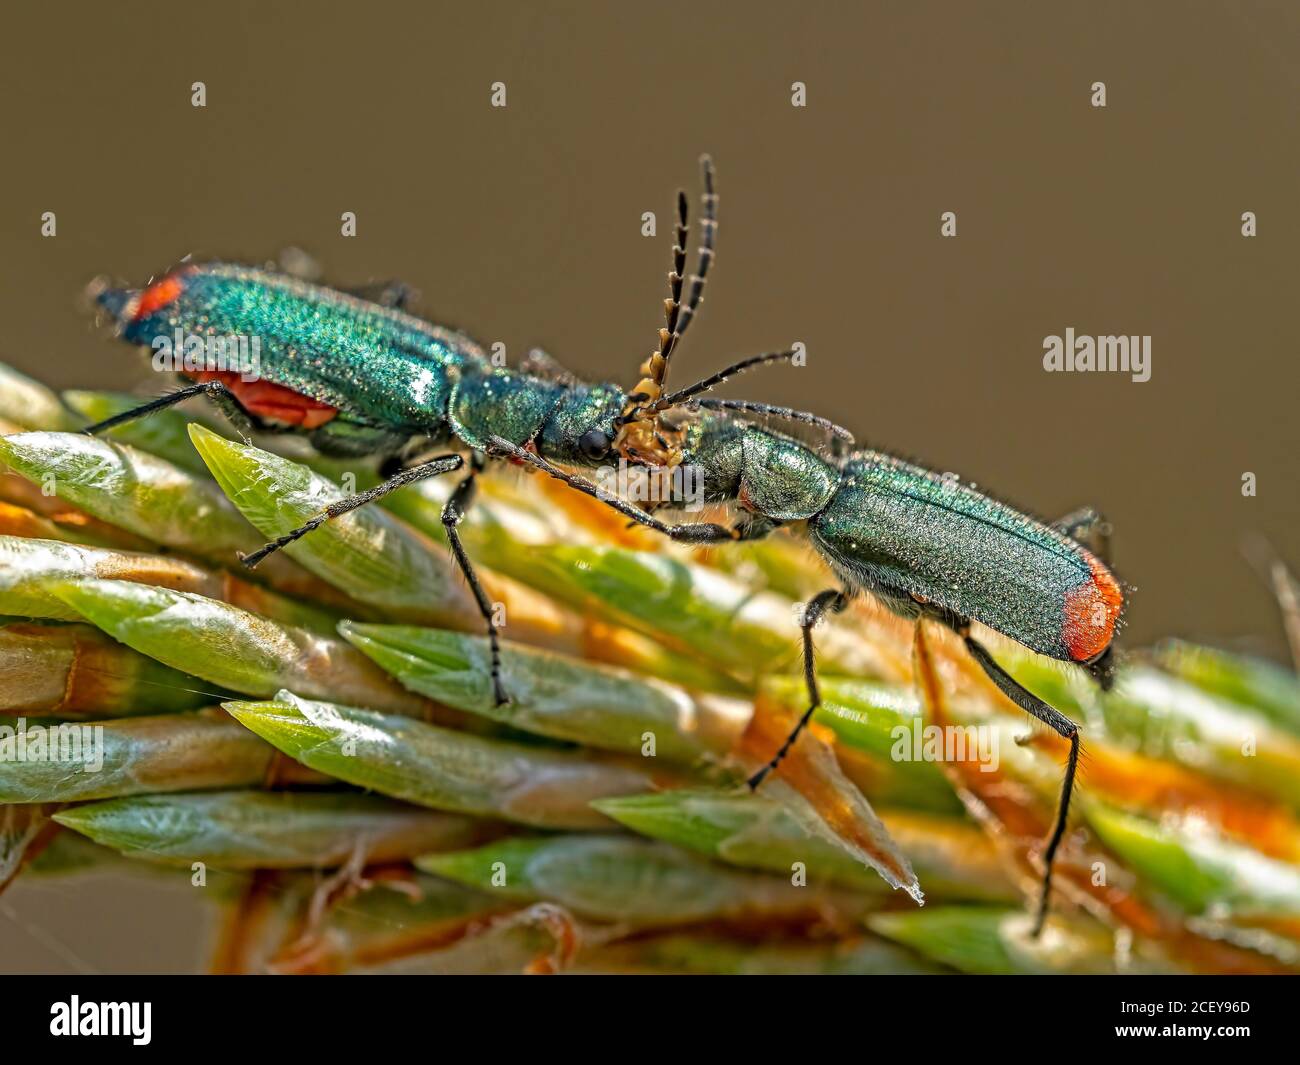 A pair of Common Malachite (Malachius bipustulatus) beetles appearing to fight each other. Found on Sopley Common in Dorset. Stock Photo